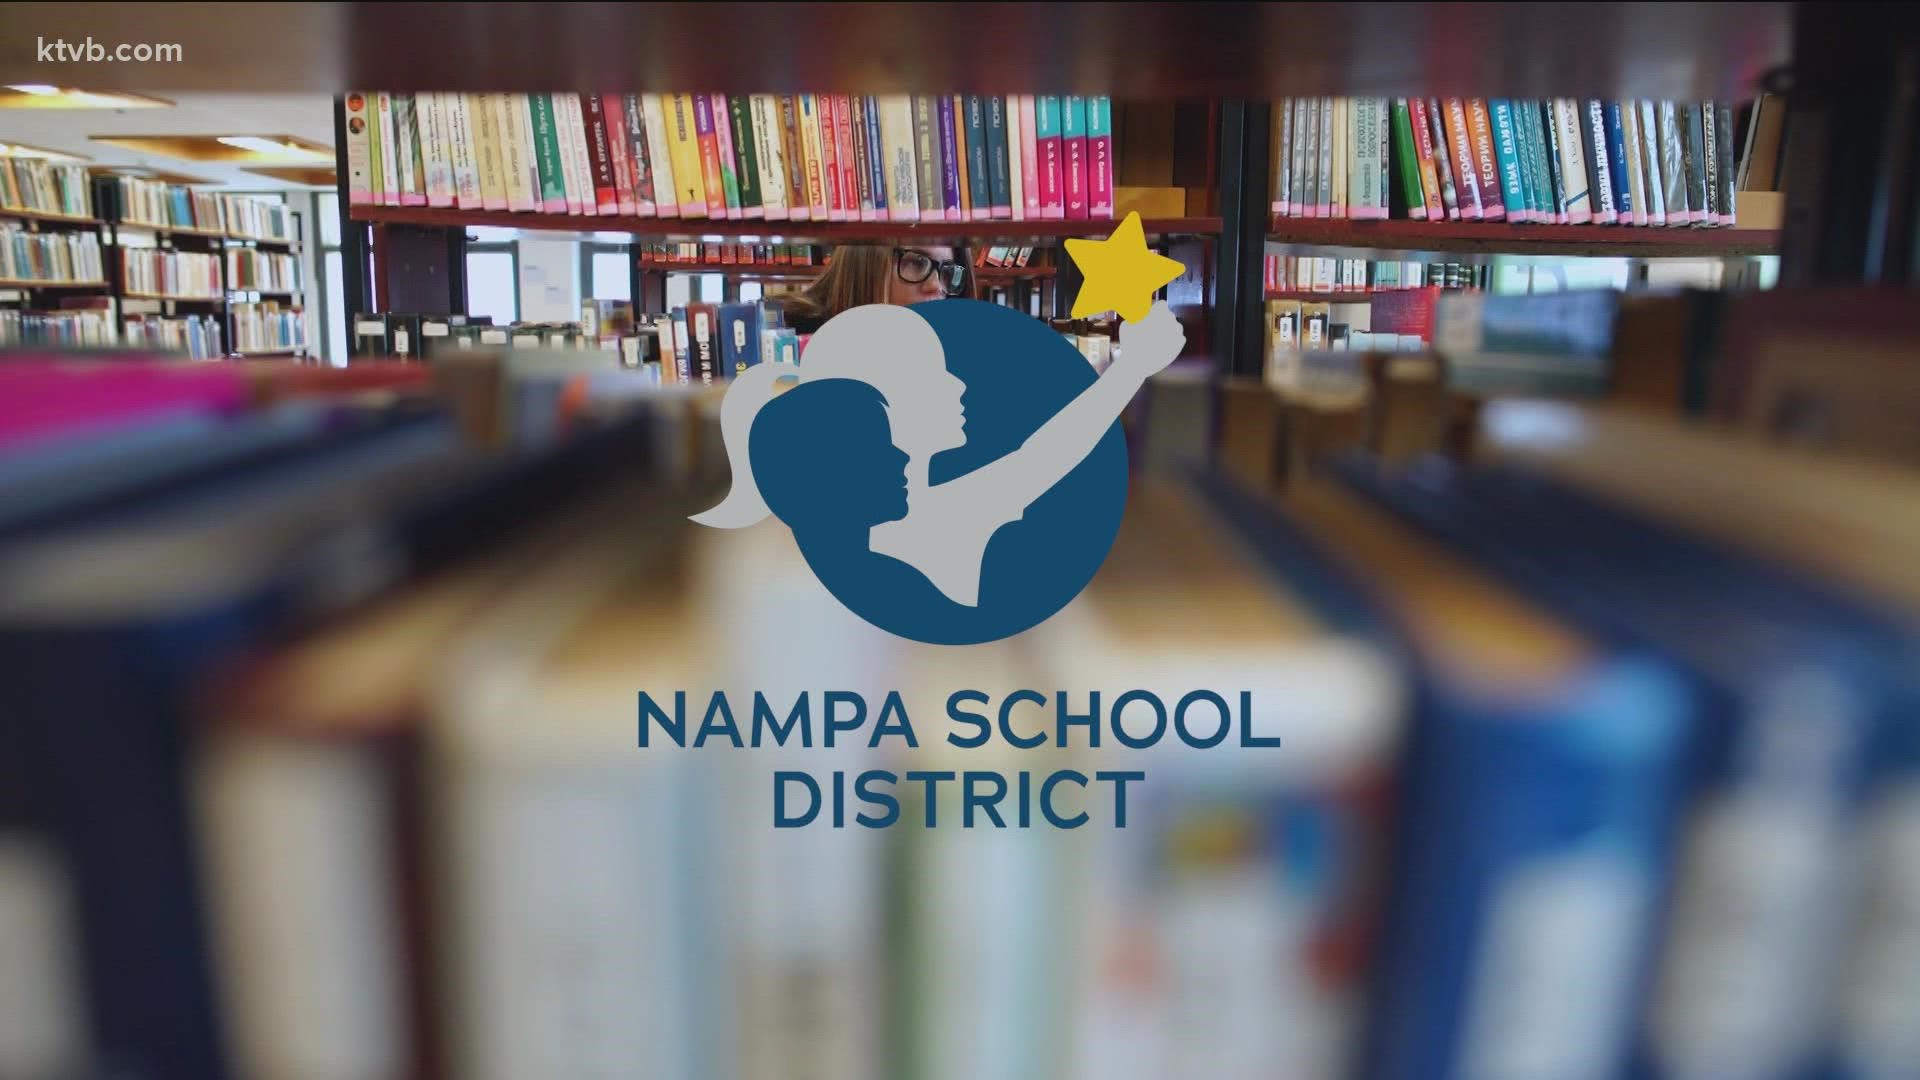 Two people dressed as handmaids from Margaret Atwood’s novel, “The Handmaid’s Tale,” entered the Nampa School District’s board room and took a seat in the front row.